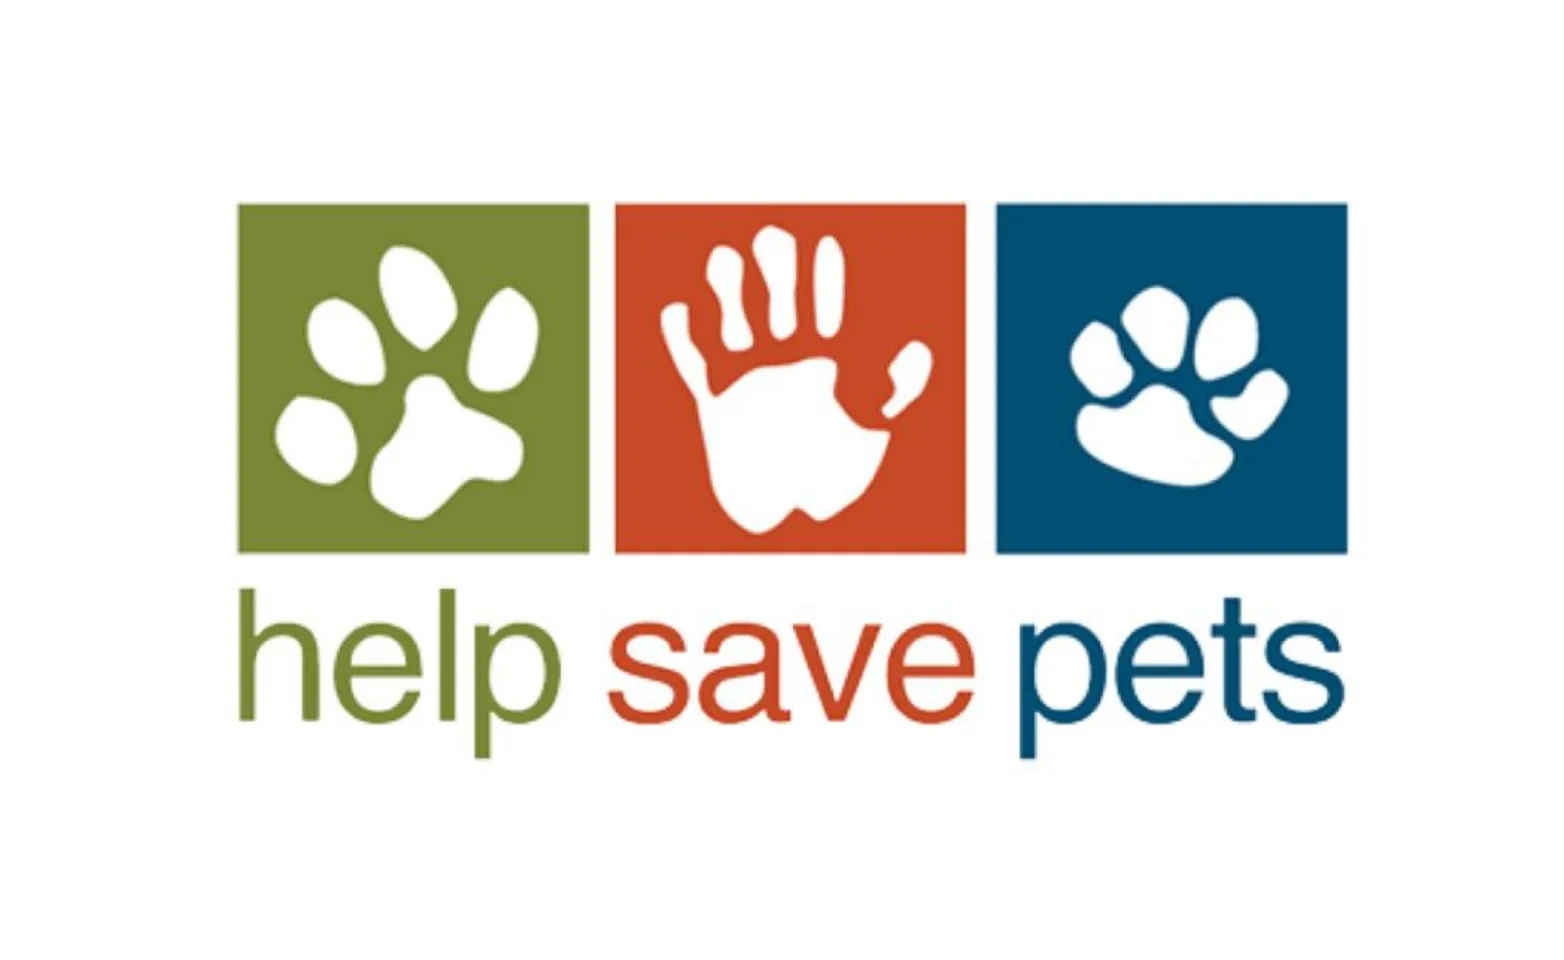 Help Save Pets logo with pet paw and human hand prints